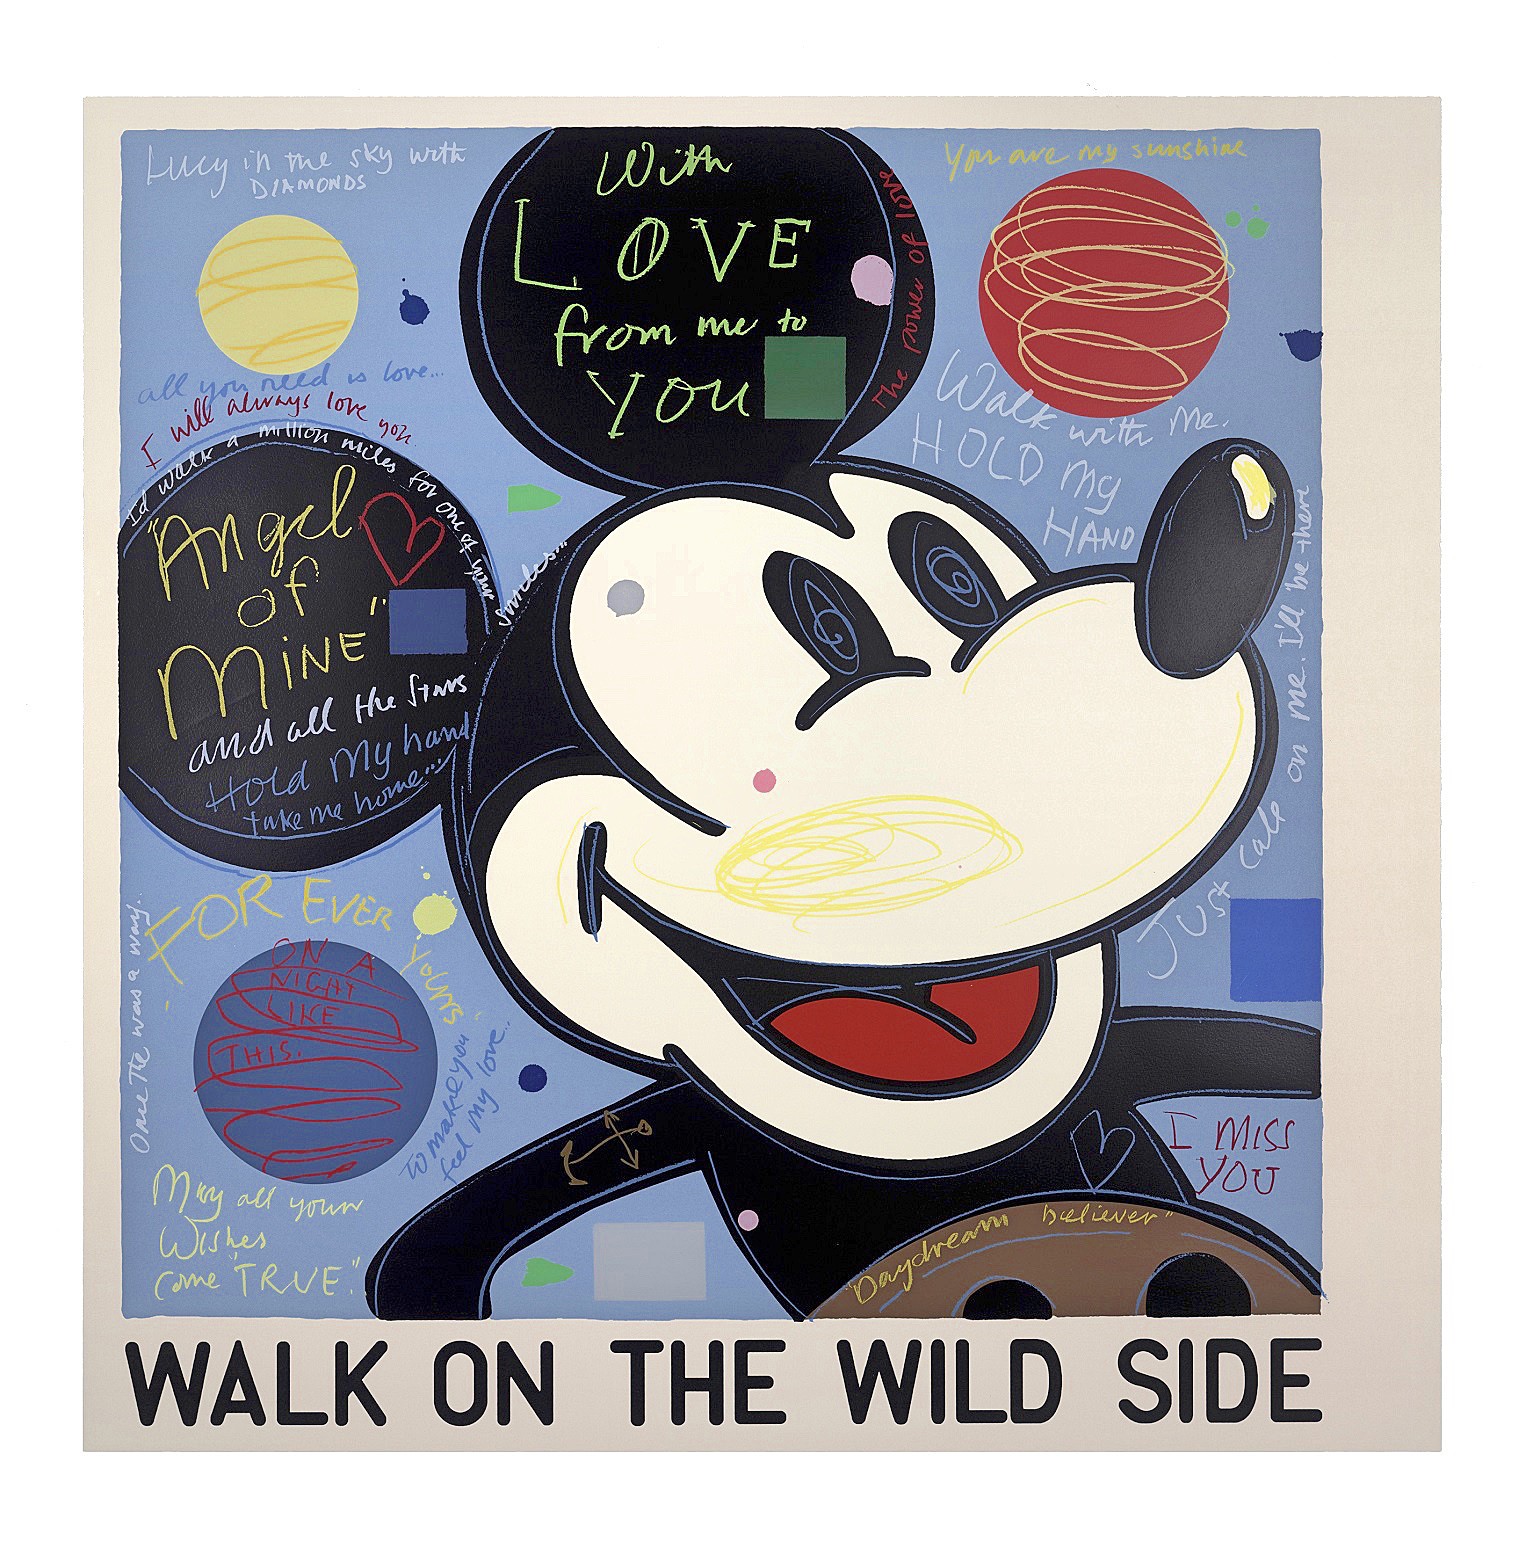 Home Decor Arts & Crafts With Love David Spiller Mickey